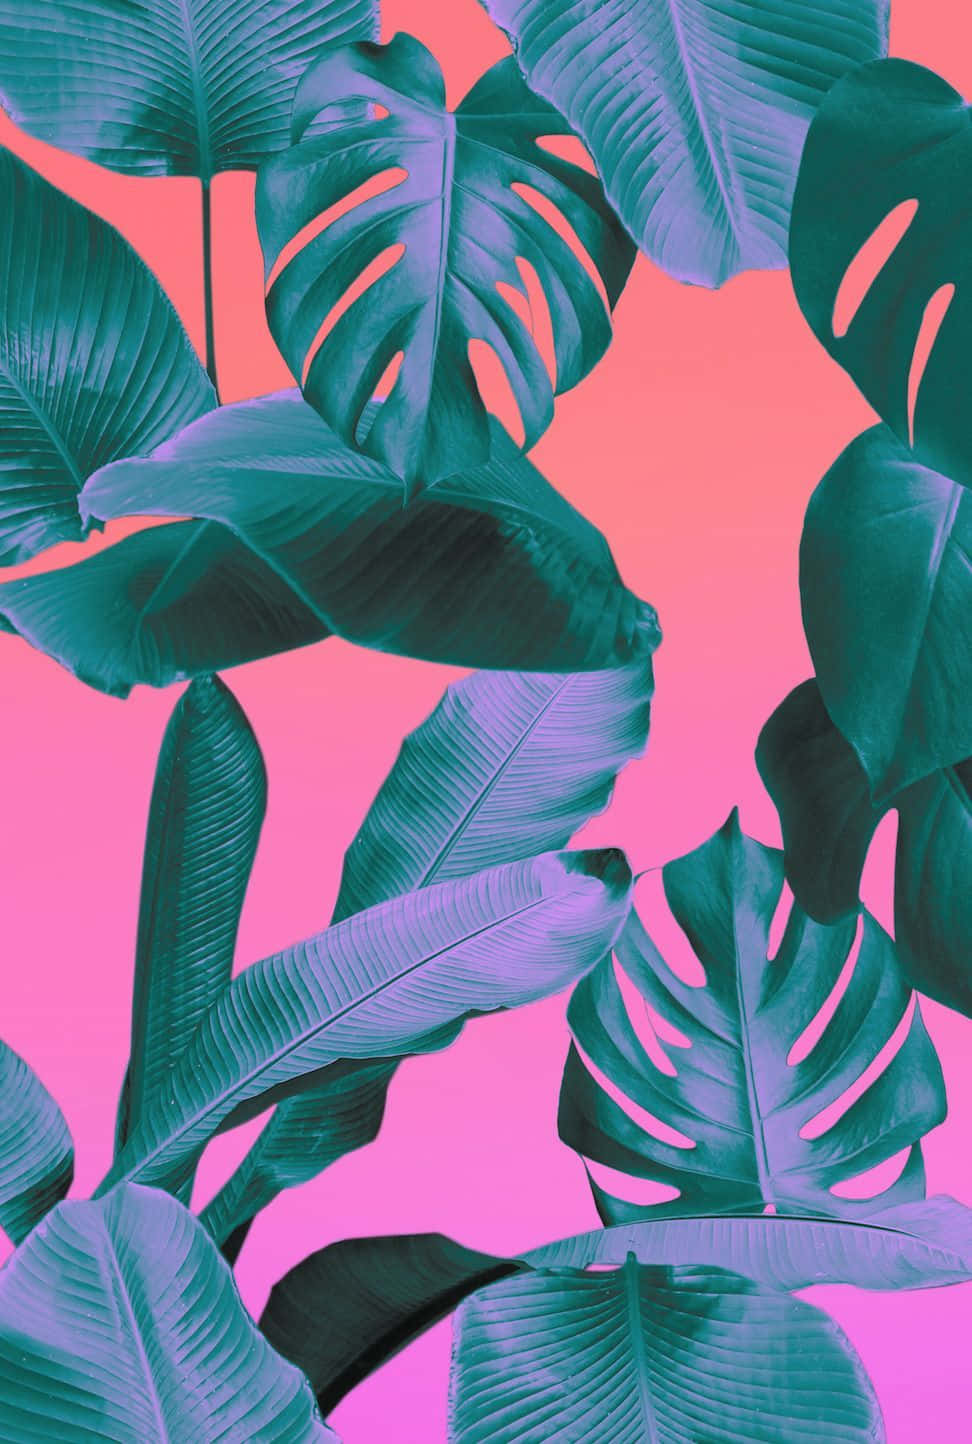 Escape to the warmth of an aesthetic tropical paradise Wallpaper